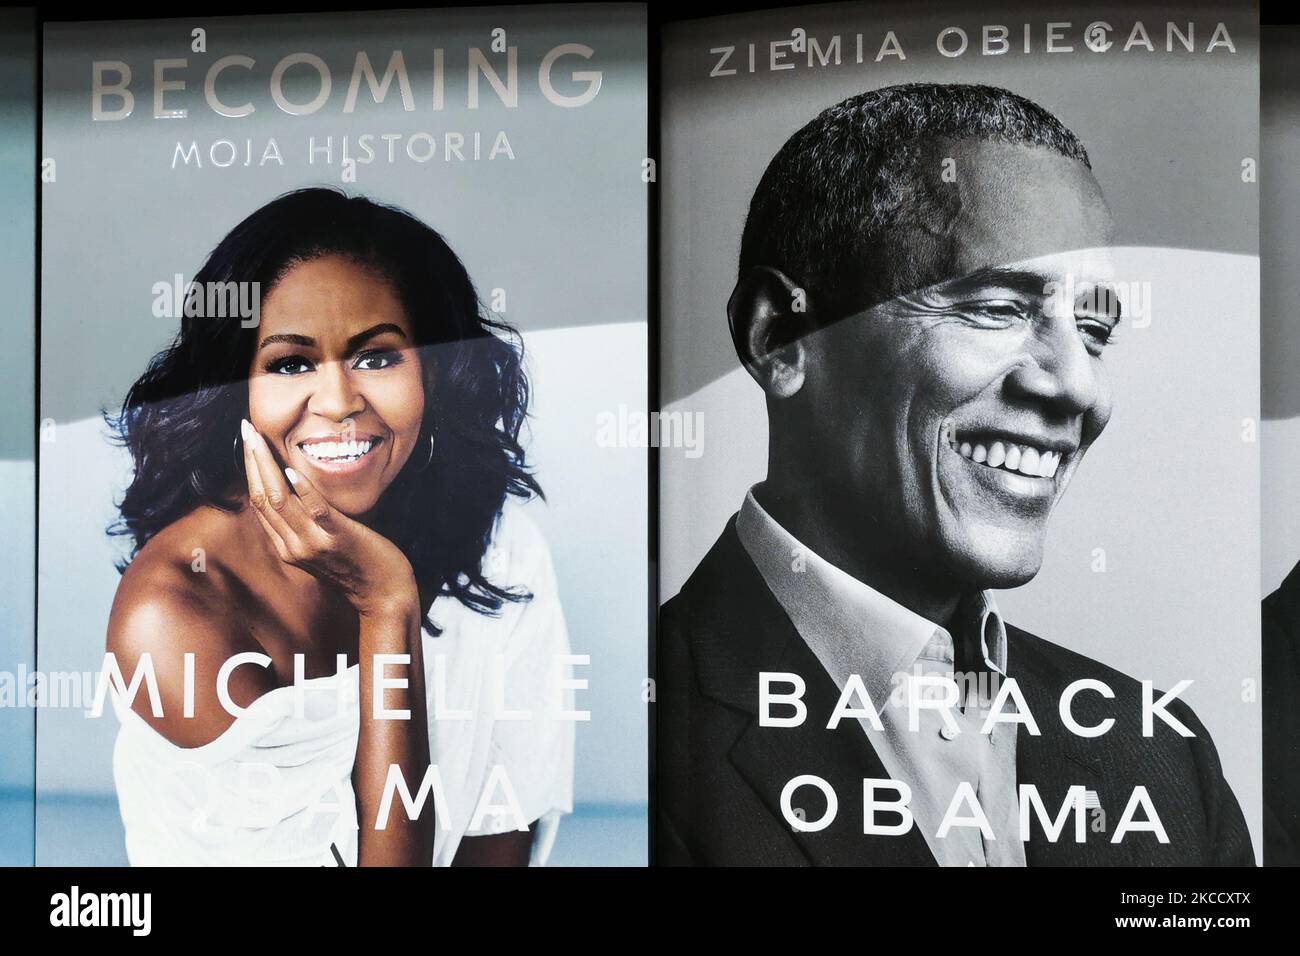 Obama's A Promised Land sells almost 890,000 copies on first day